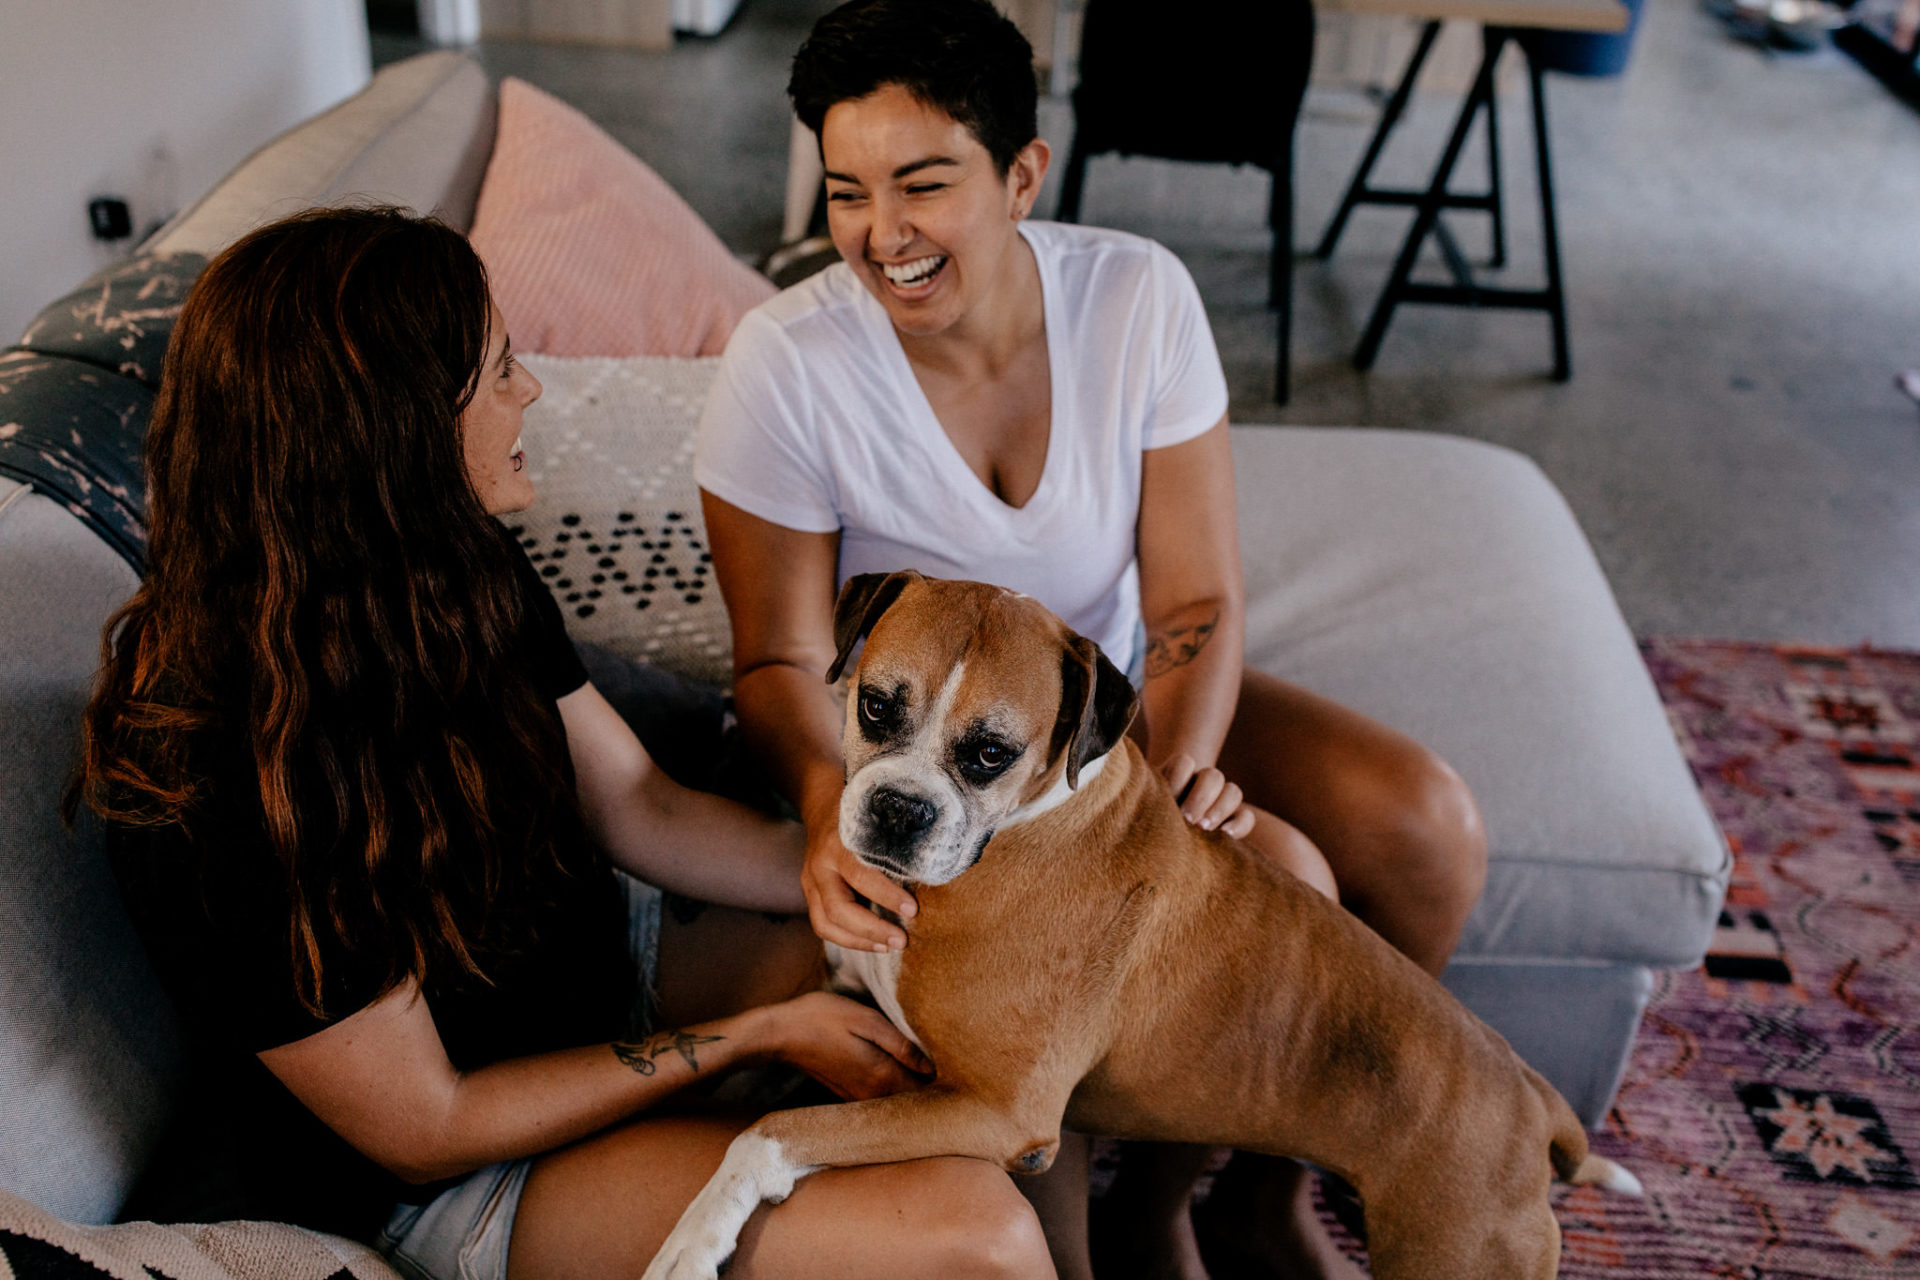 In Love Session Thornbury-engagement photos-home-story-couple shoot-lesbian couple with dog-lgbtq-friendly-wedding-photographer-melbourne